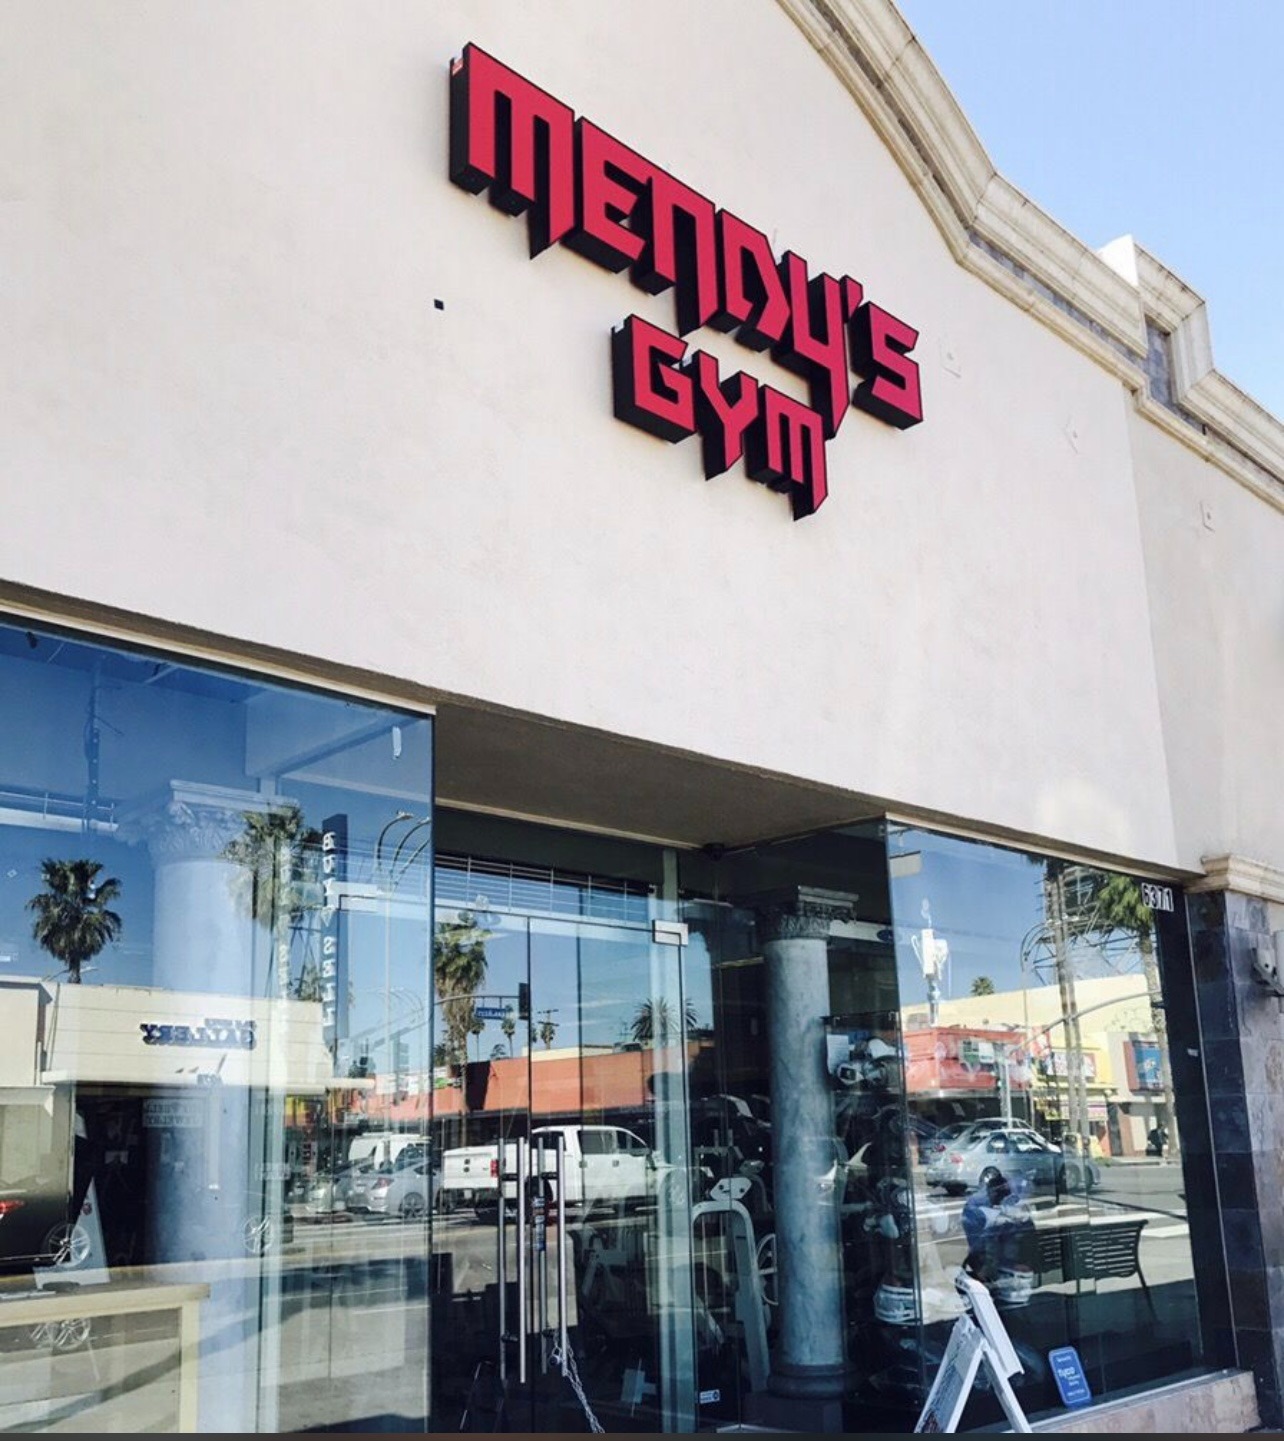 Outside picture of Mendy's Gym in Van Nuys, CA